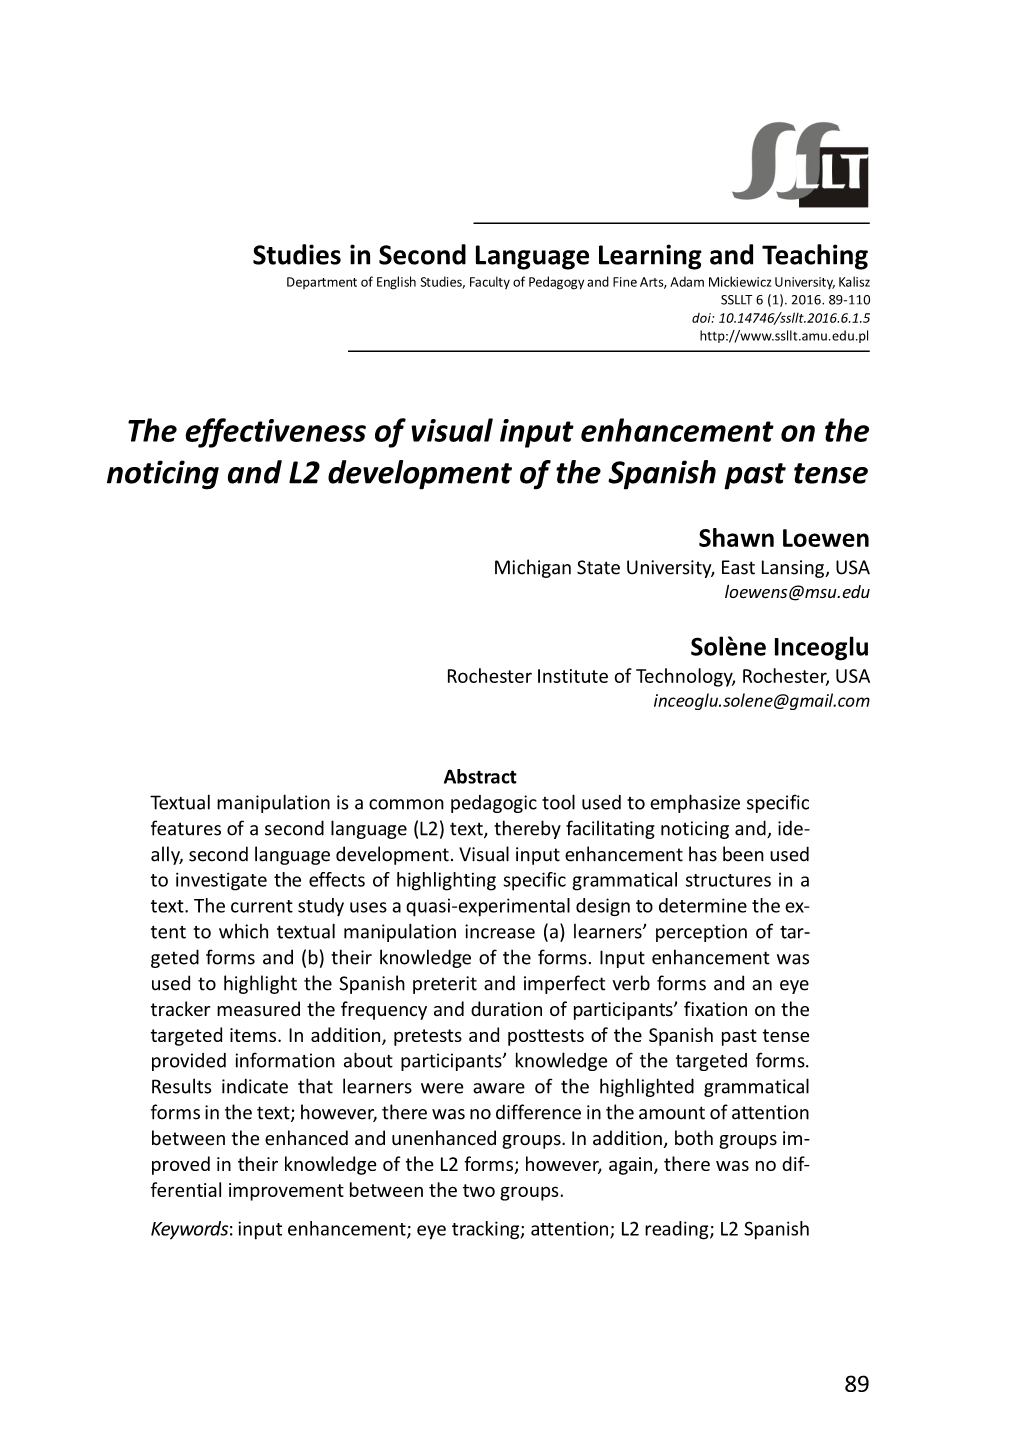 The Effectiveness of Visual Input Enhancement on the Noticing and L2 Development of the Spanish Past Tense